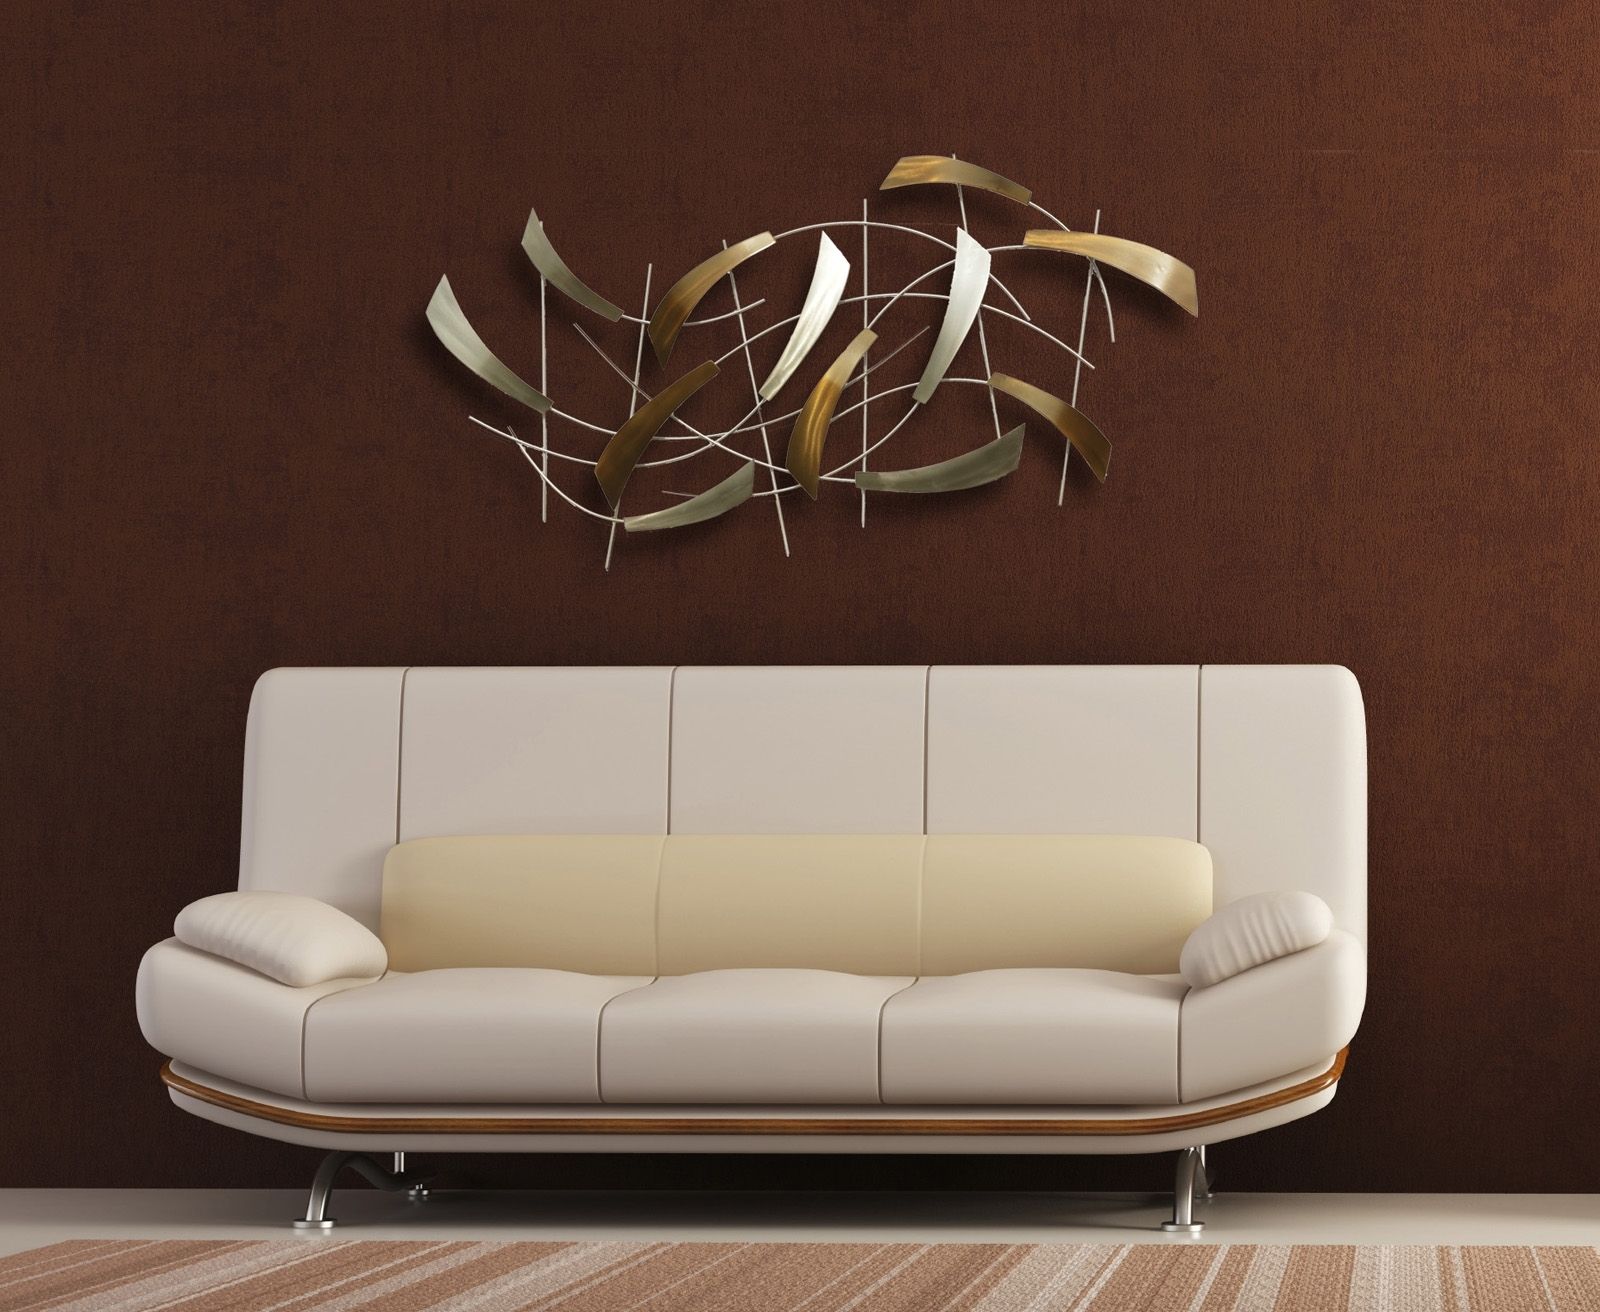 Wall Decor Pertaining To Favorite Modern Wall Accents (View 3 of 15)